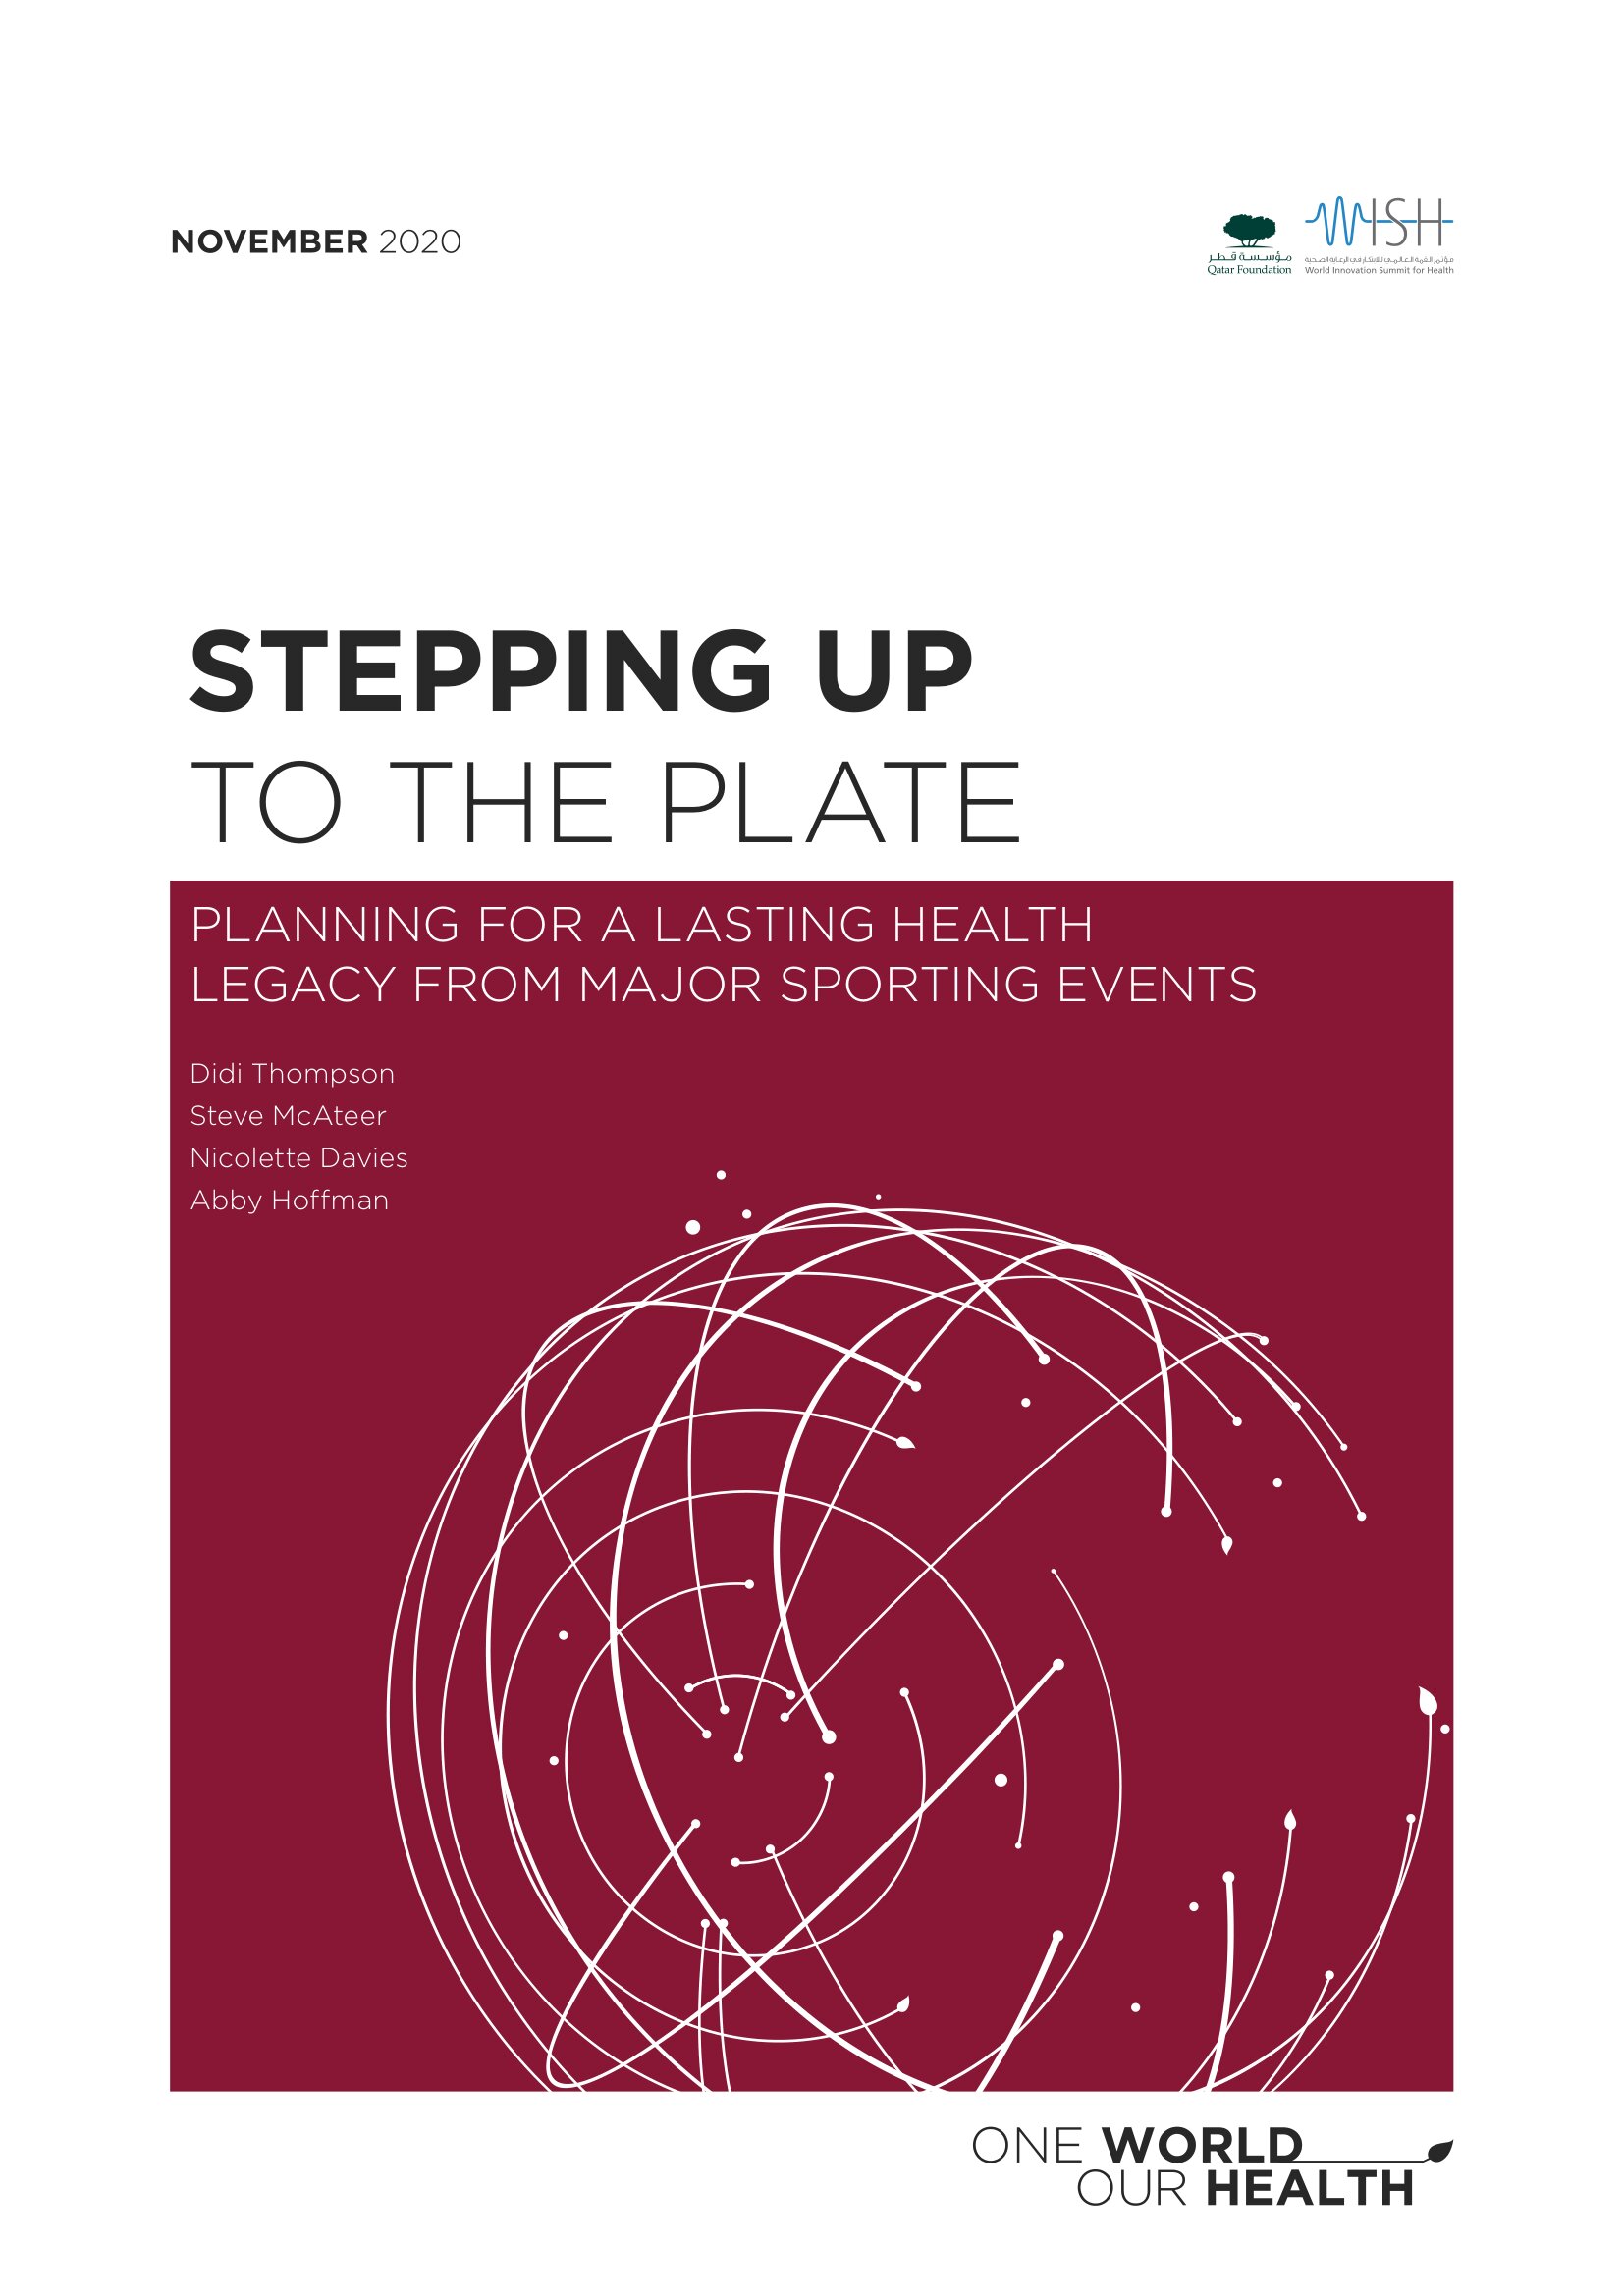 Stepping Up to the Plate: Planning for a Lasting Health Legacy from Major Sporting Events